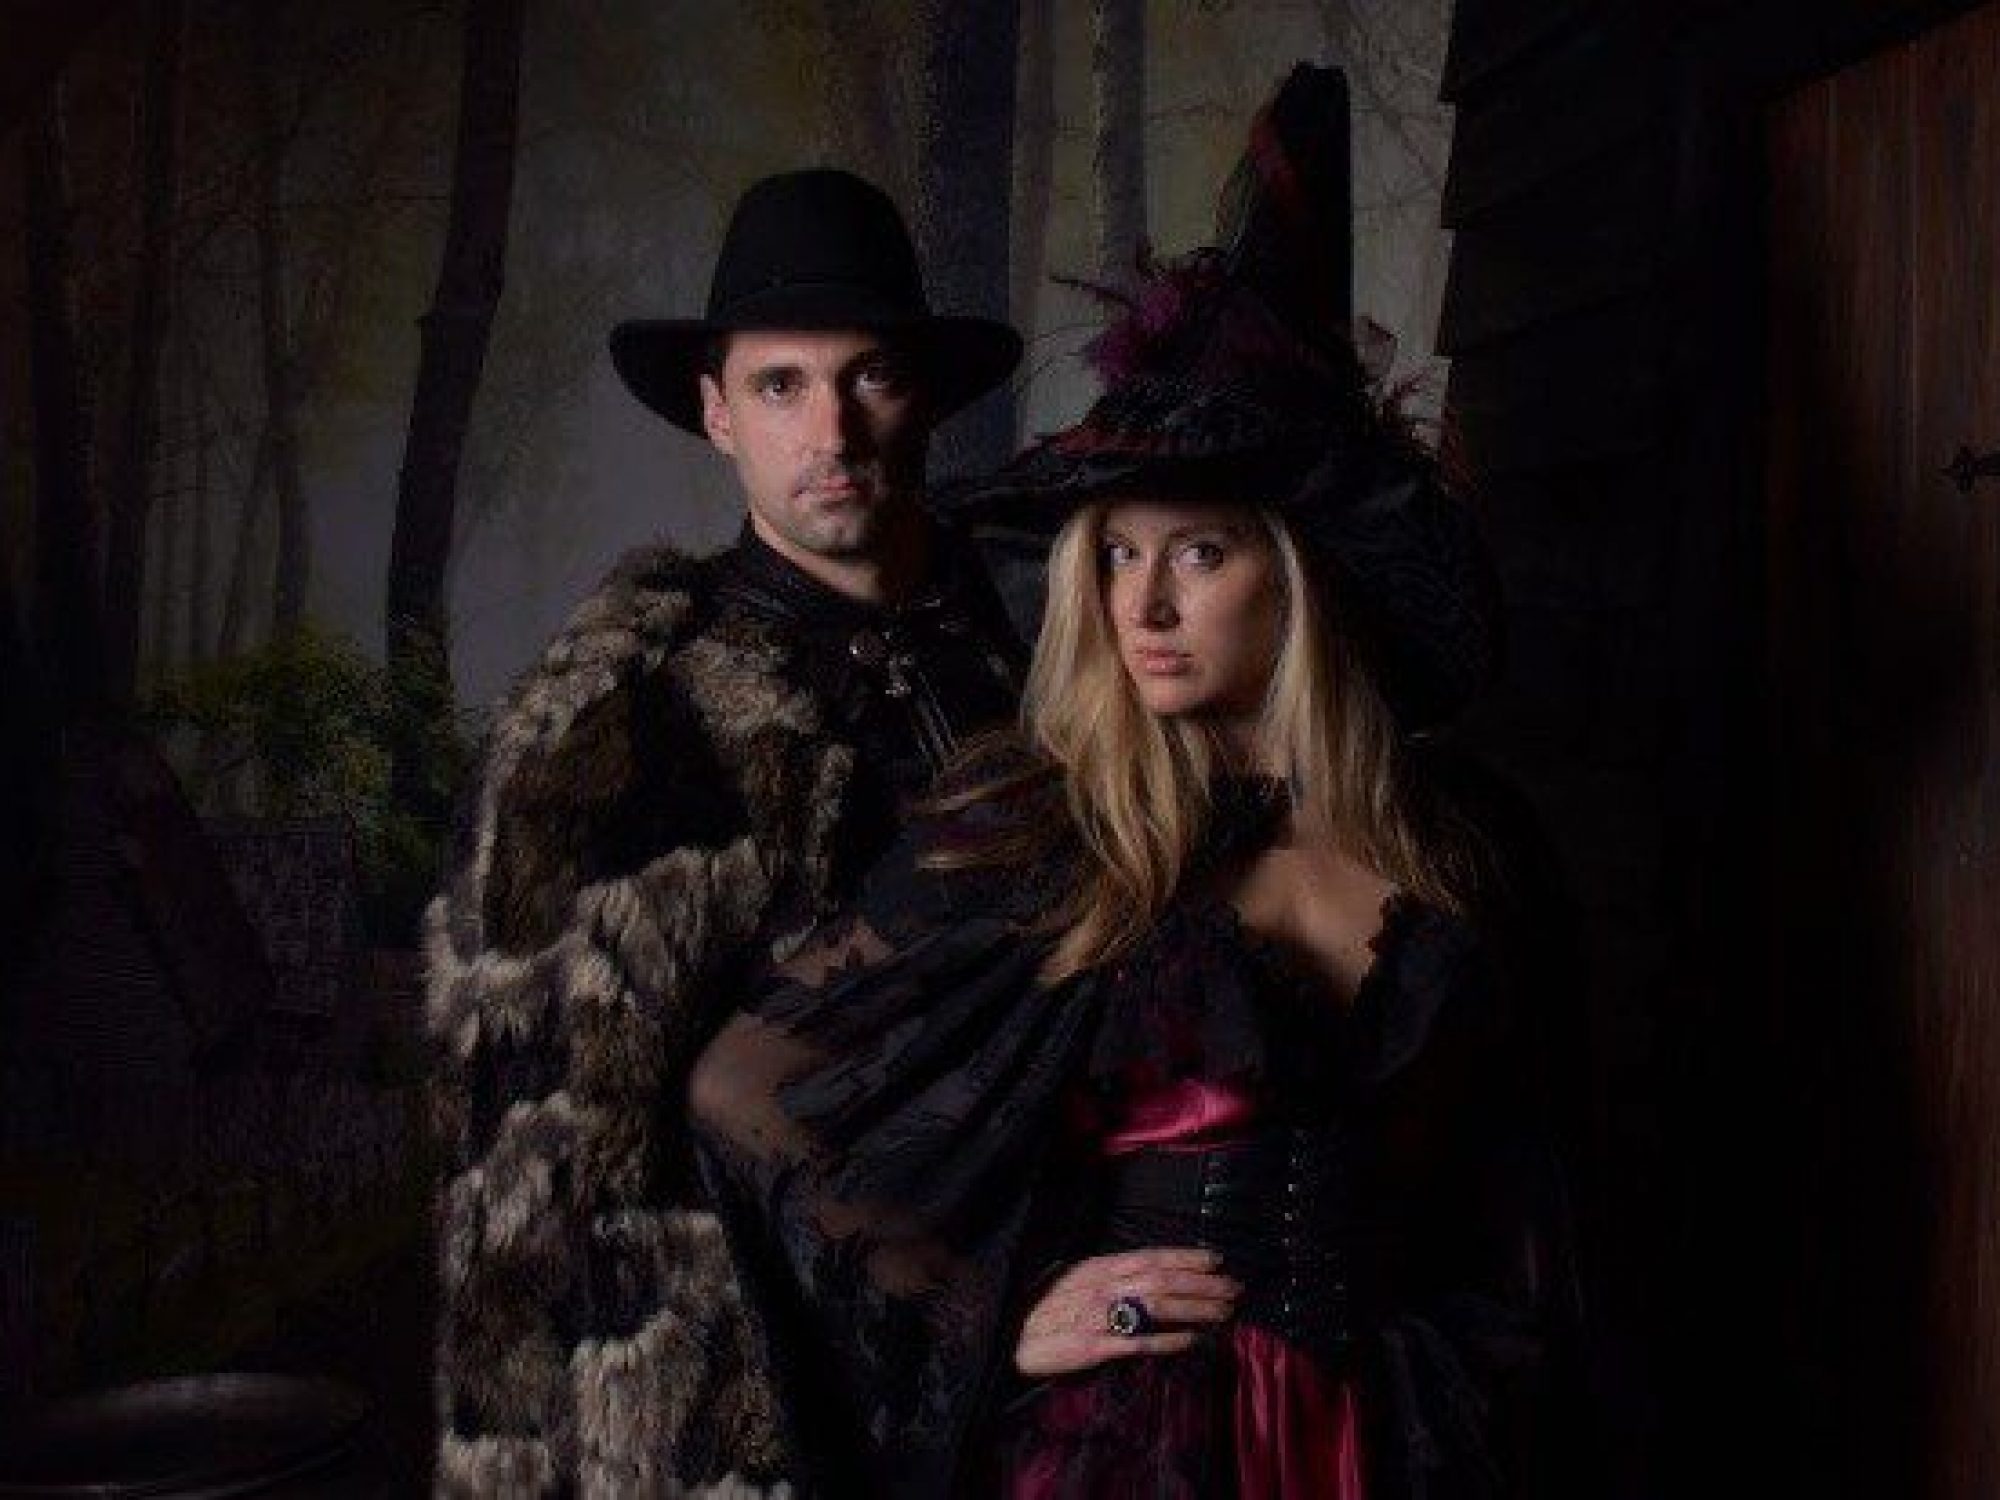 Man and woman in fur and witch costumes.